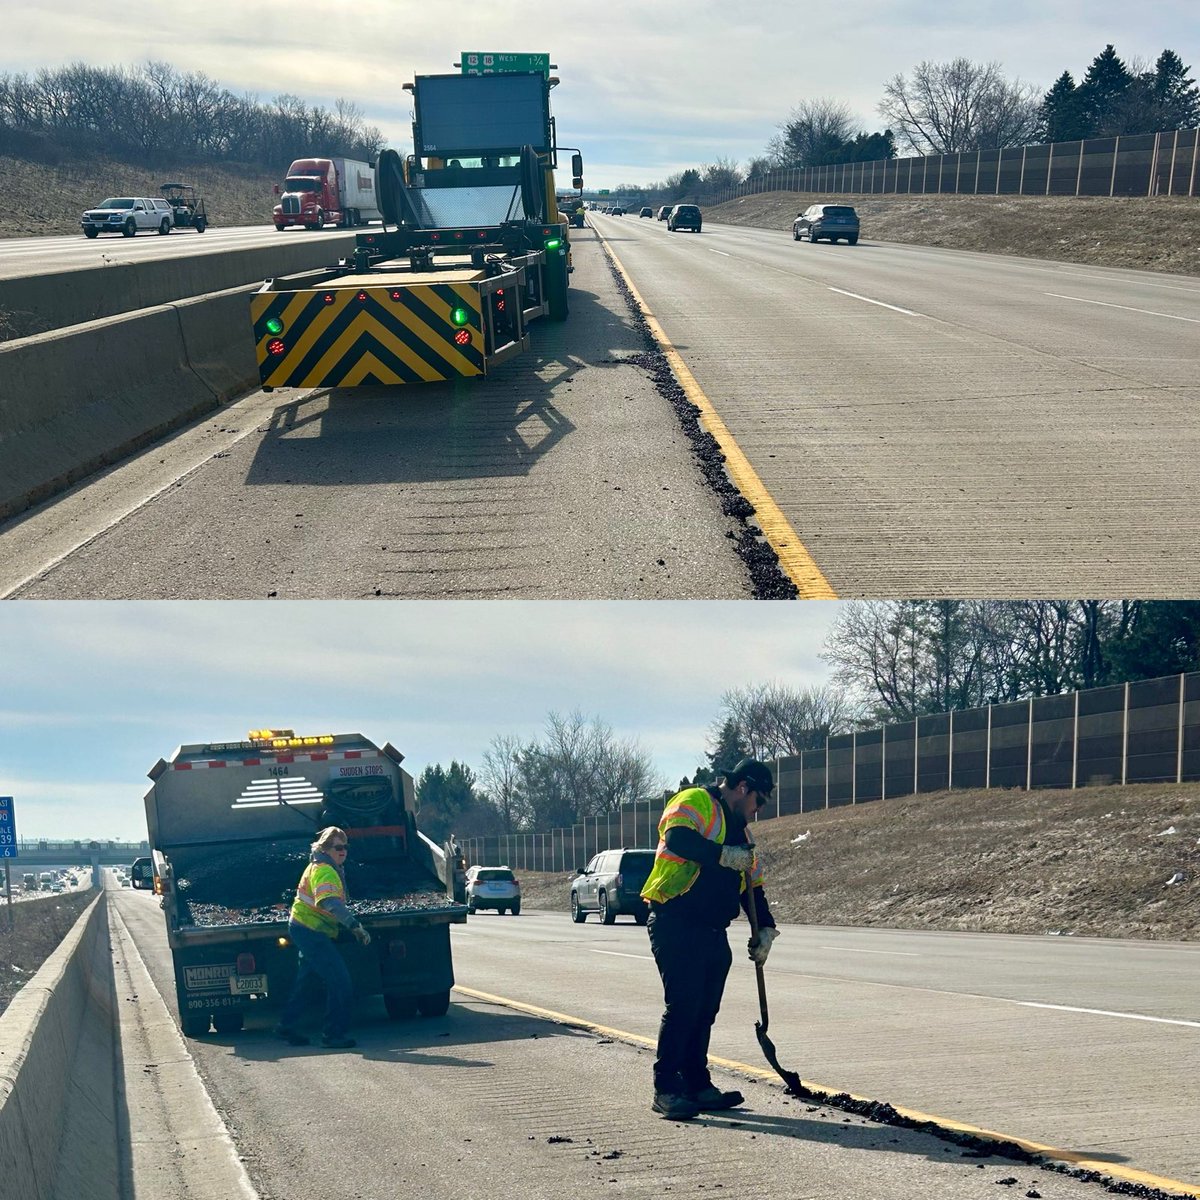 As the weather warms up, maintenance crews may be out patching and repairing roads.

REMINDER: See lights? Move over or slow down.

docs.legis.wisconsin.gov/statutes/statu…
.
.
.
#MoveOverMonday #HighwaySafety